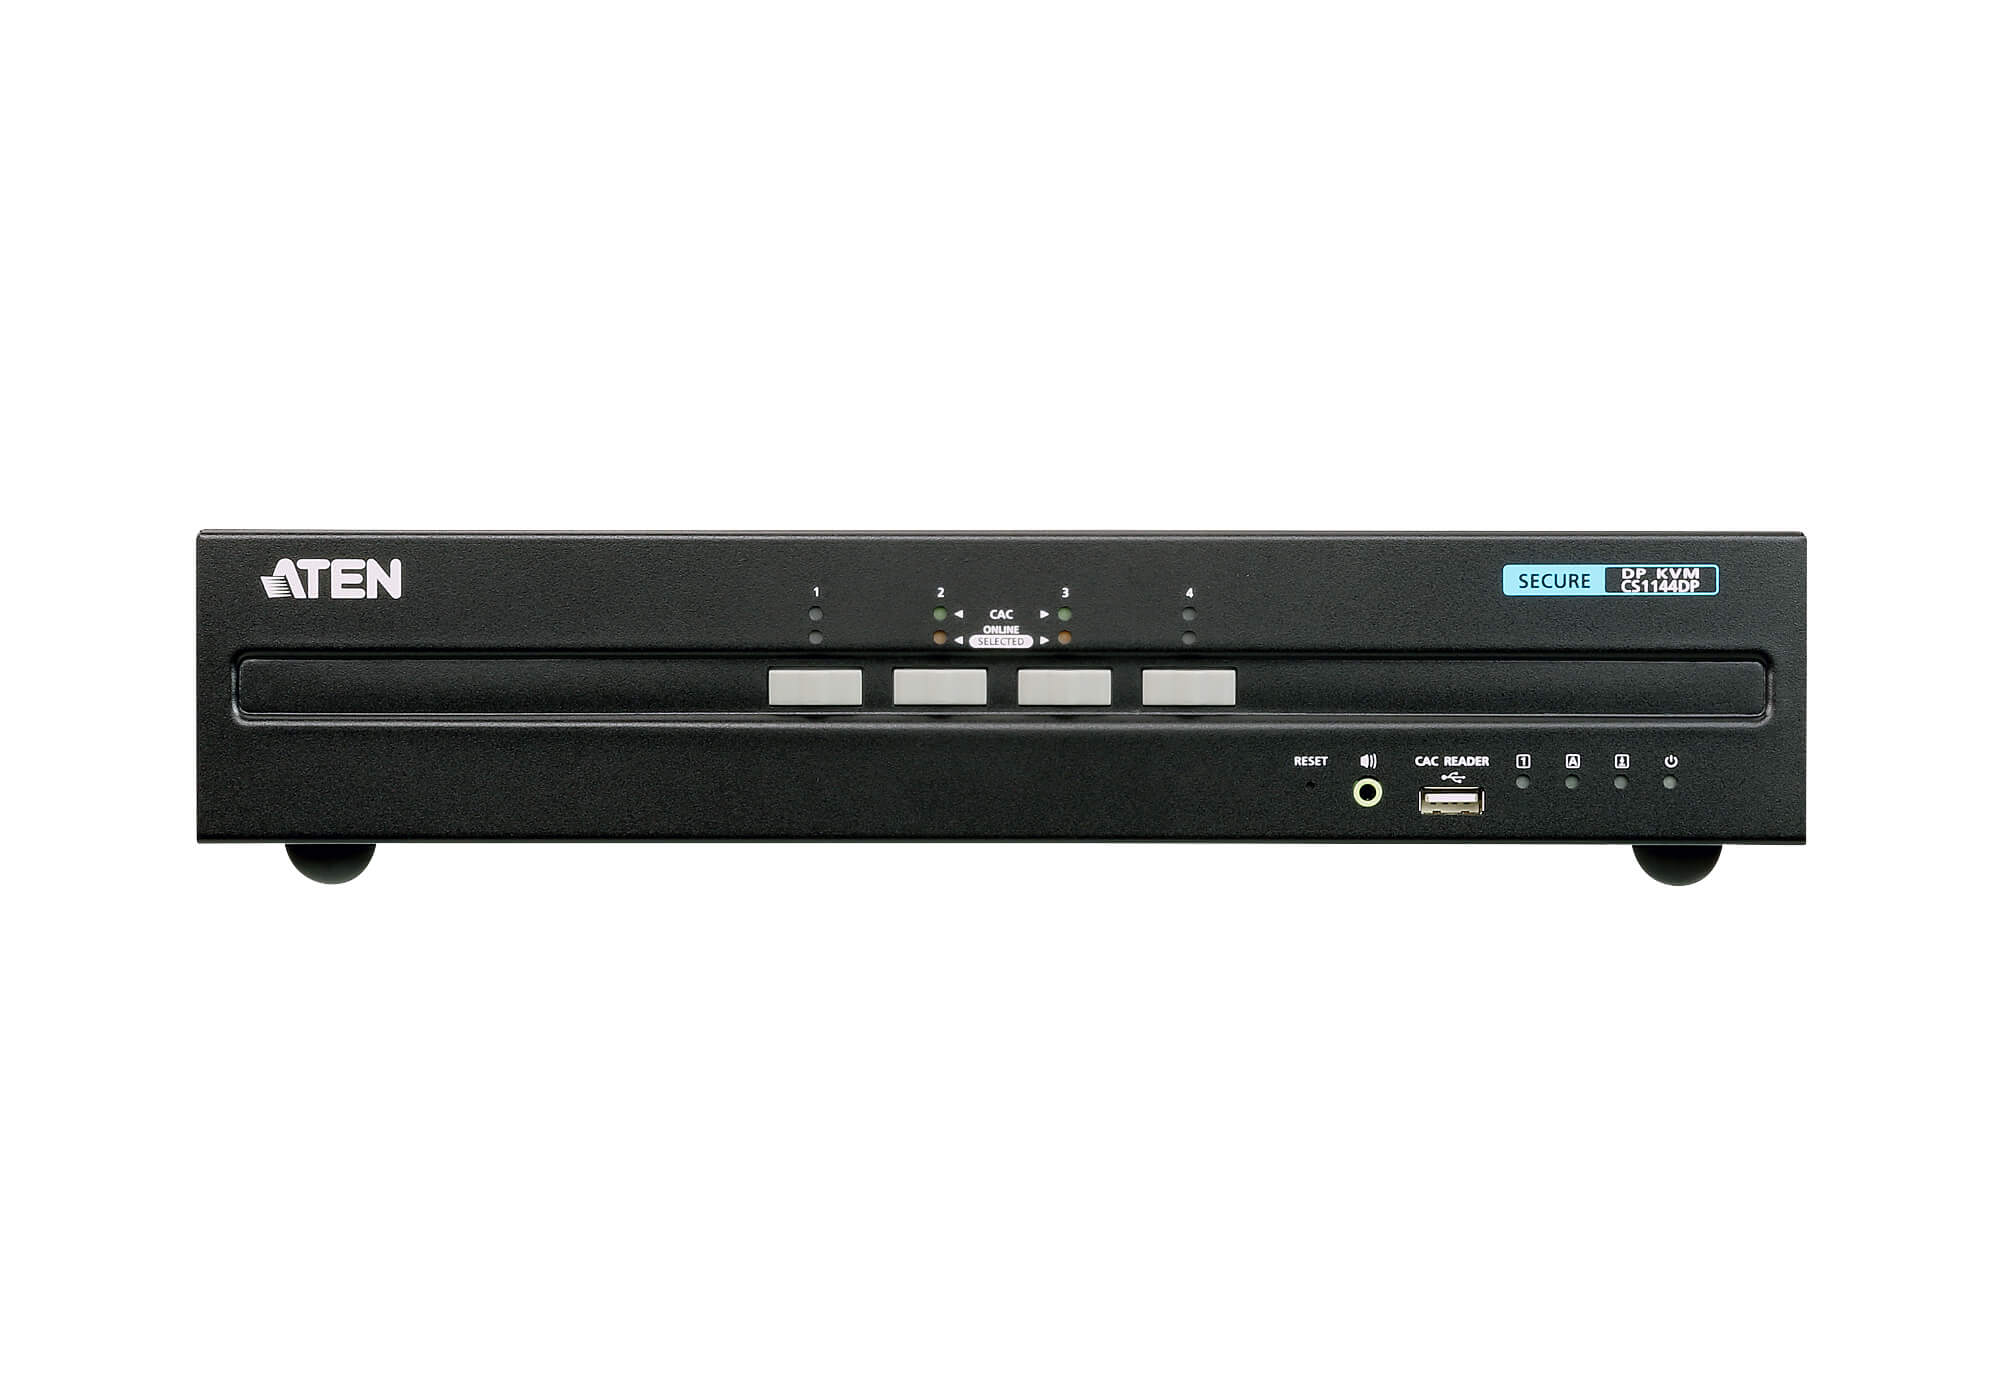 Aten 4-Port USB DisplayPort Dual Display Secure KVM Switch (PSS PP v3.0 Compliant), enable and disable CAC devices by port, with CAC black